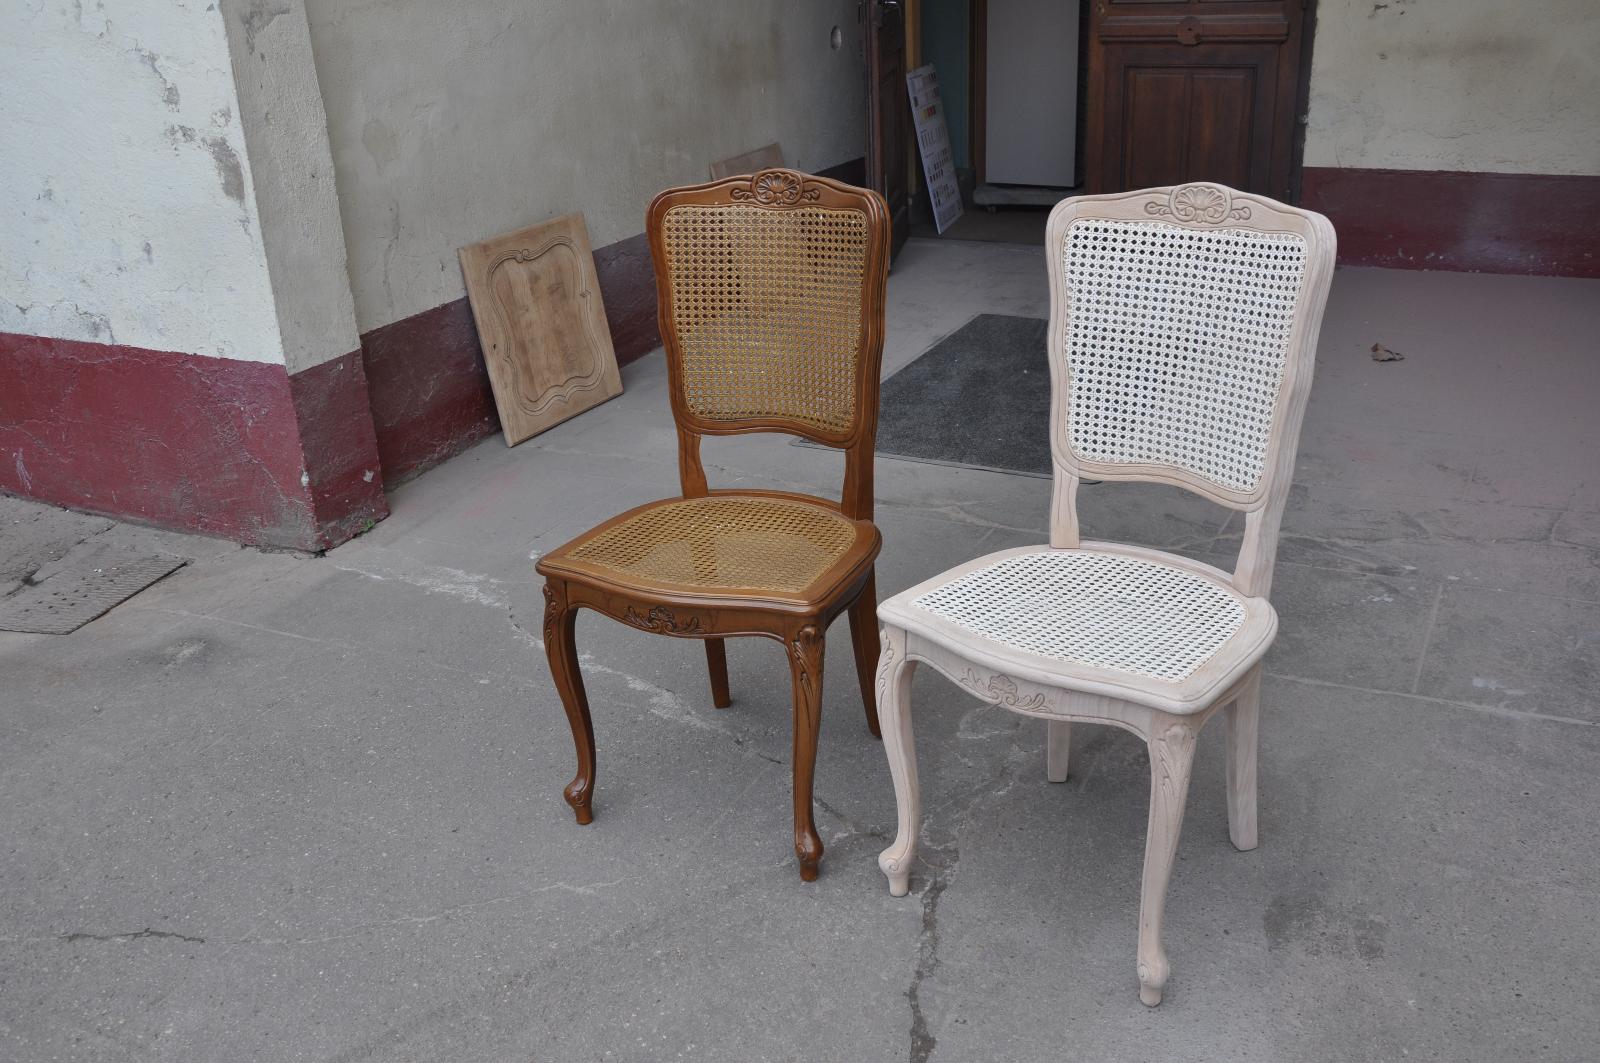 Relooking de chaise - Moselle (57)